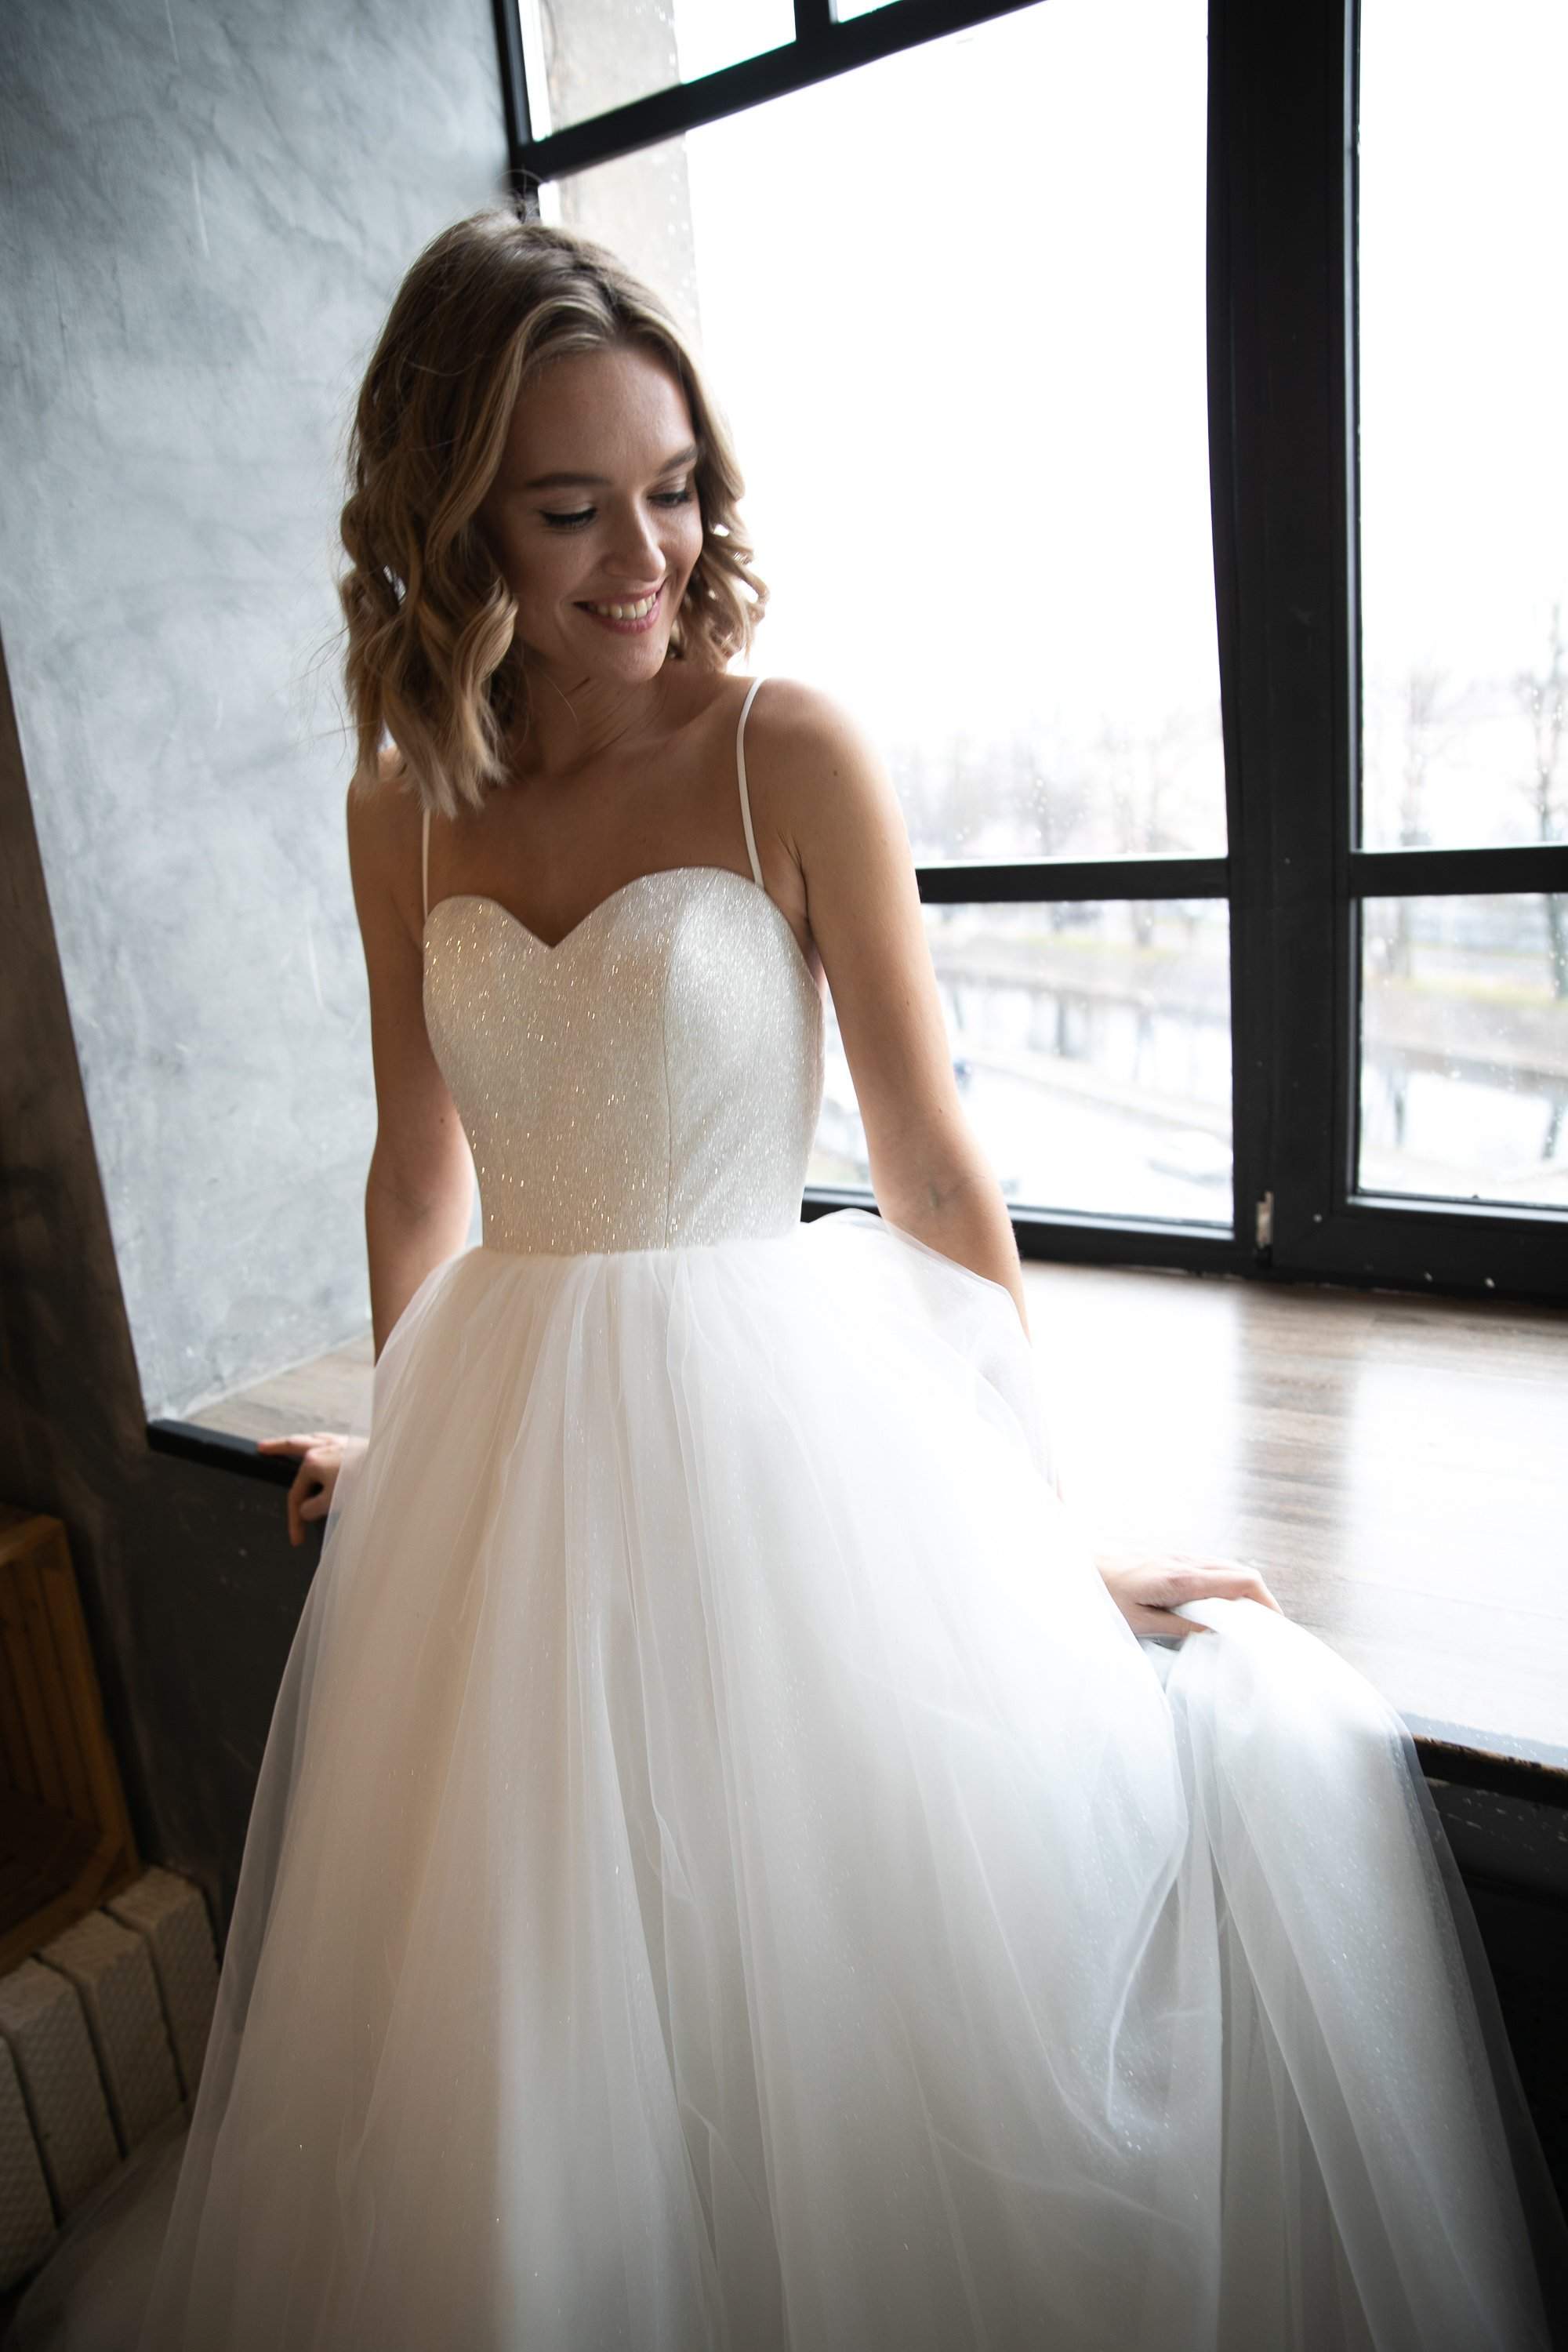 302A Sweetheart Neckline and Spaghetti Straps Wedding Dress with